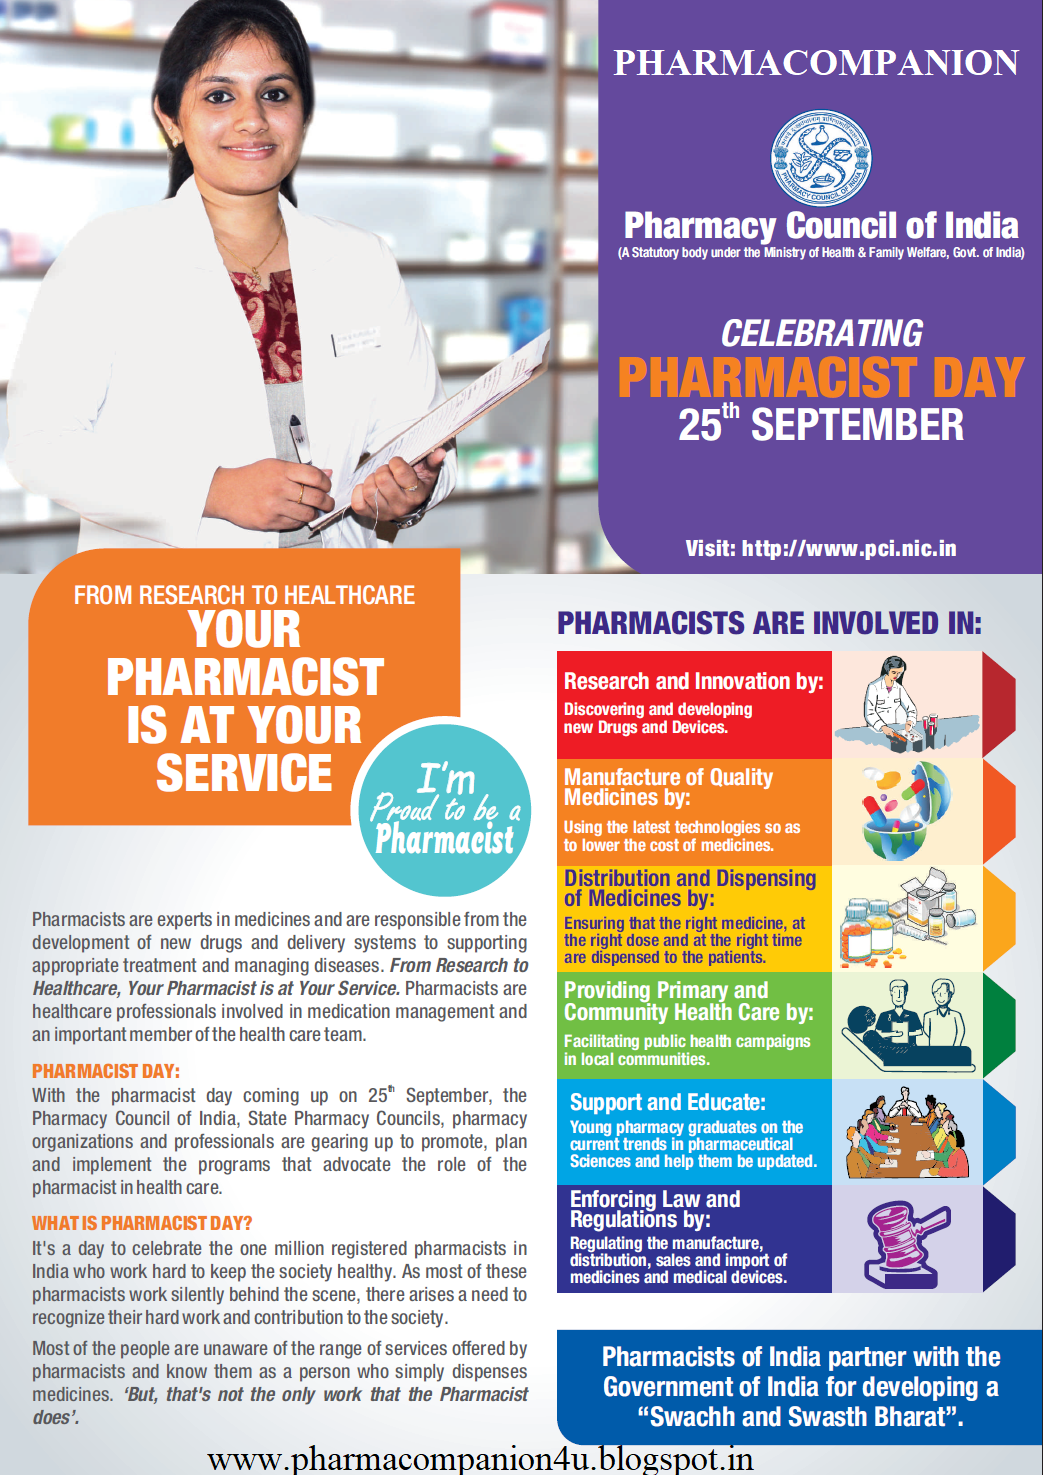 PHARMACOMPANION: HAPPY WORLD PHARMACIST DAY - 2017 TO ALL THE FRIENDS ...